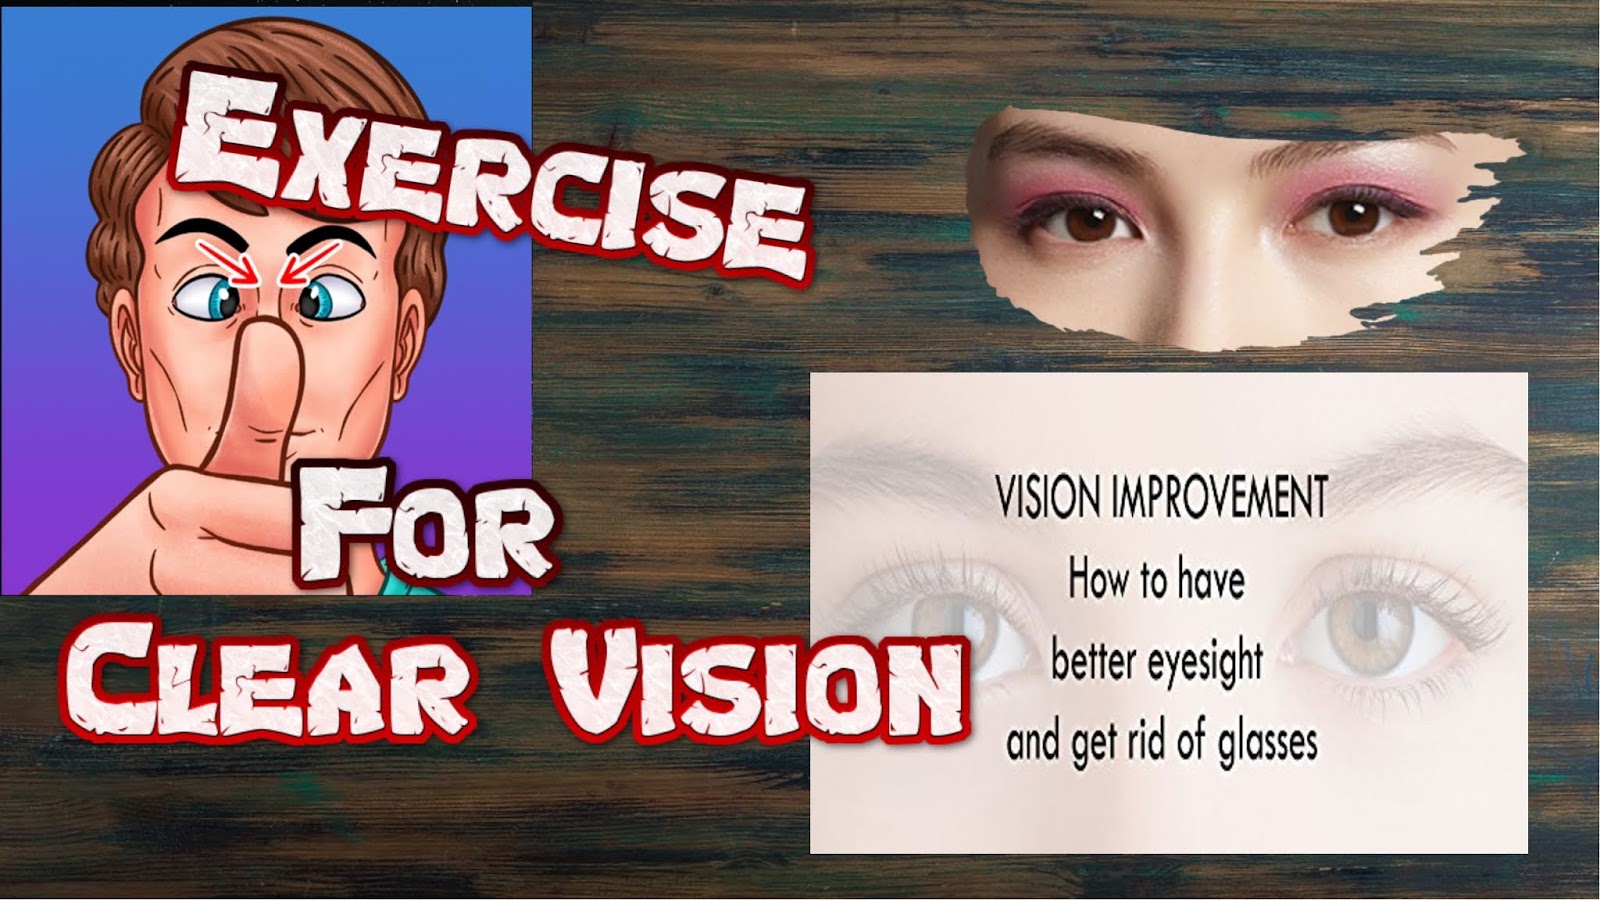 Clear vision взлома. Exercises for Eyes. Turn to Clear Vision.